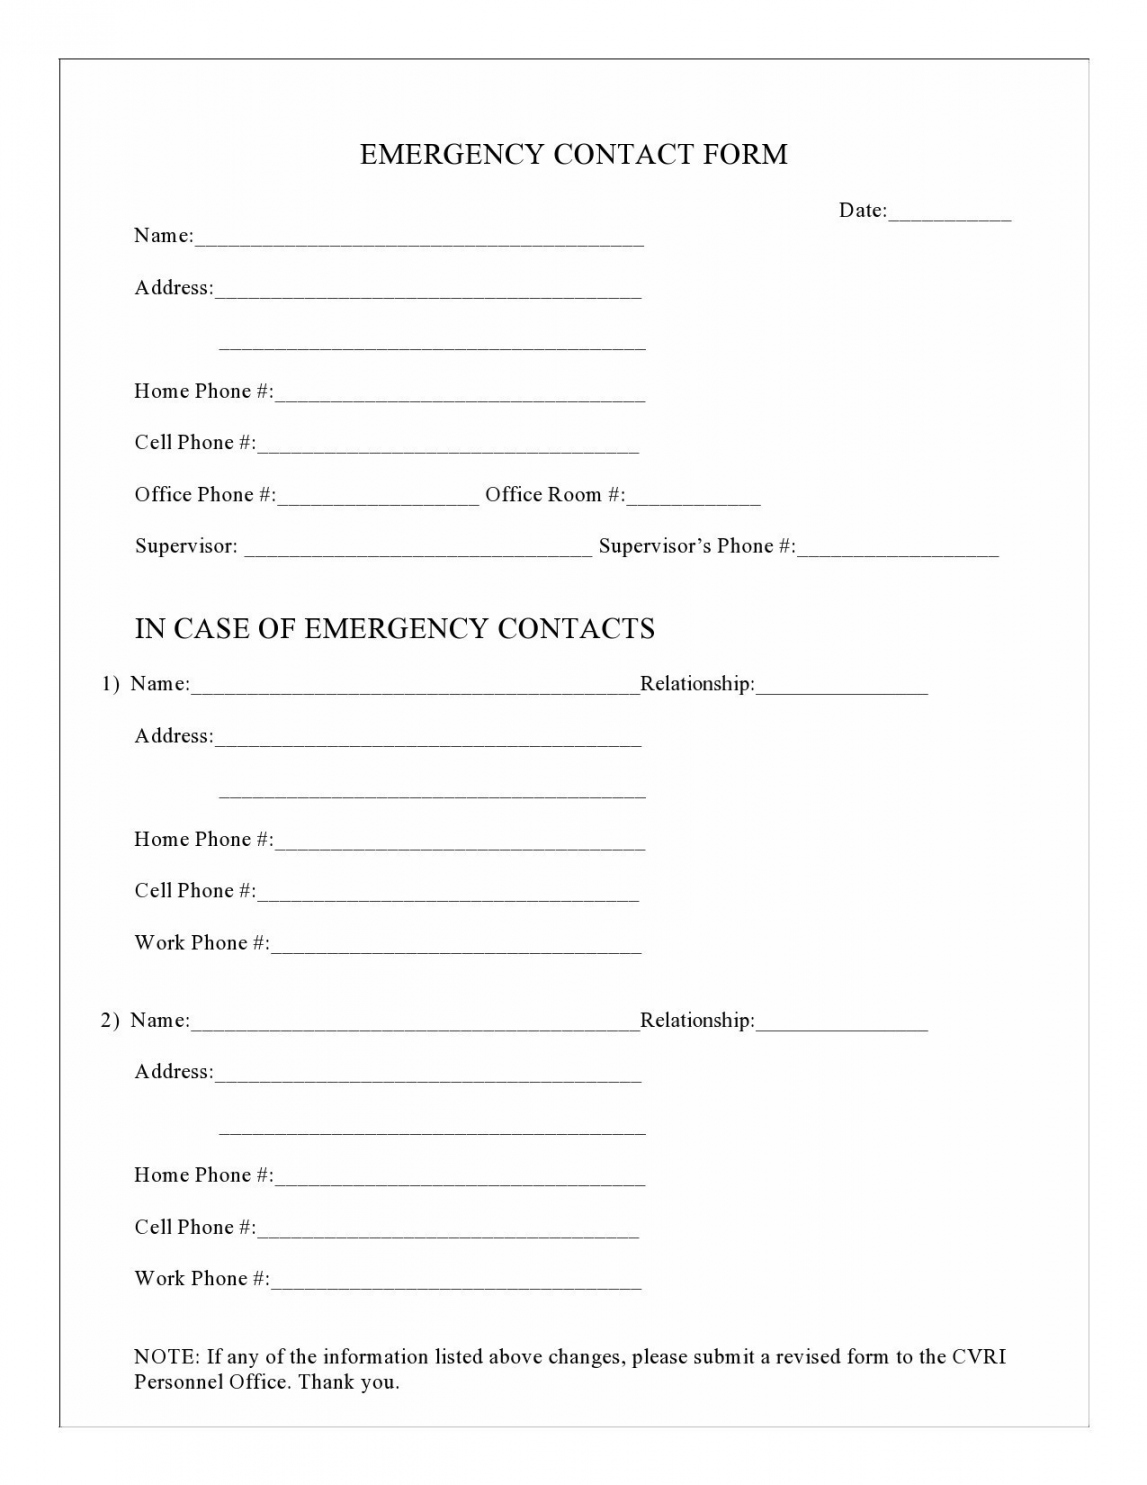 Printable Emergency Contact Forms (% Free) - FREE Printables - Free Printable Emergency Contact Form